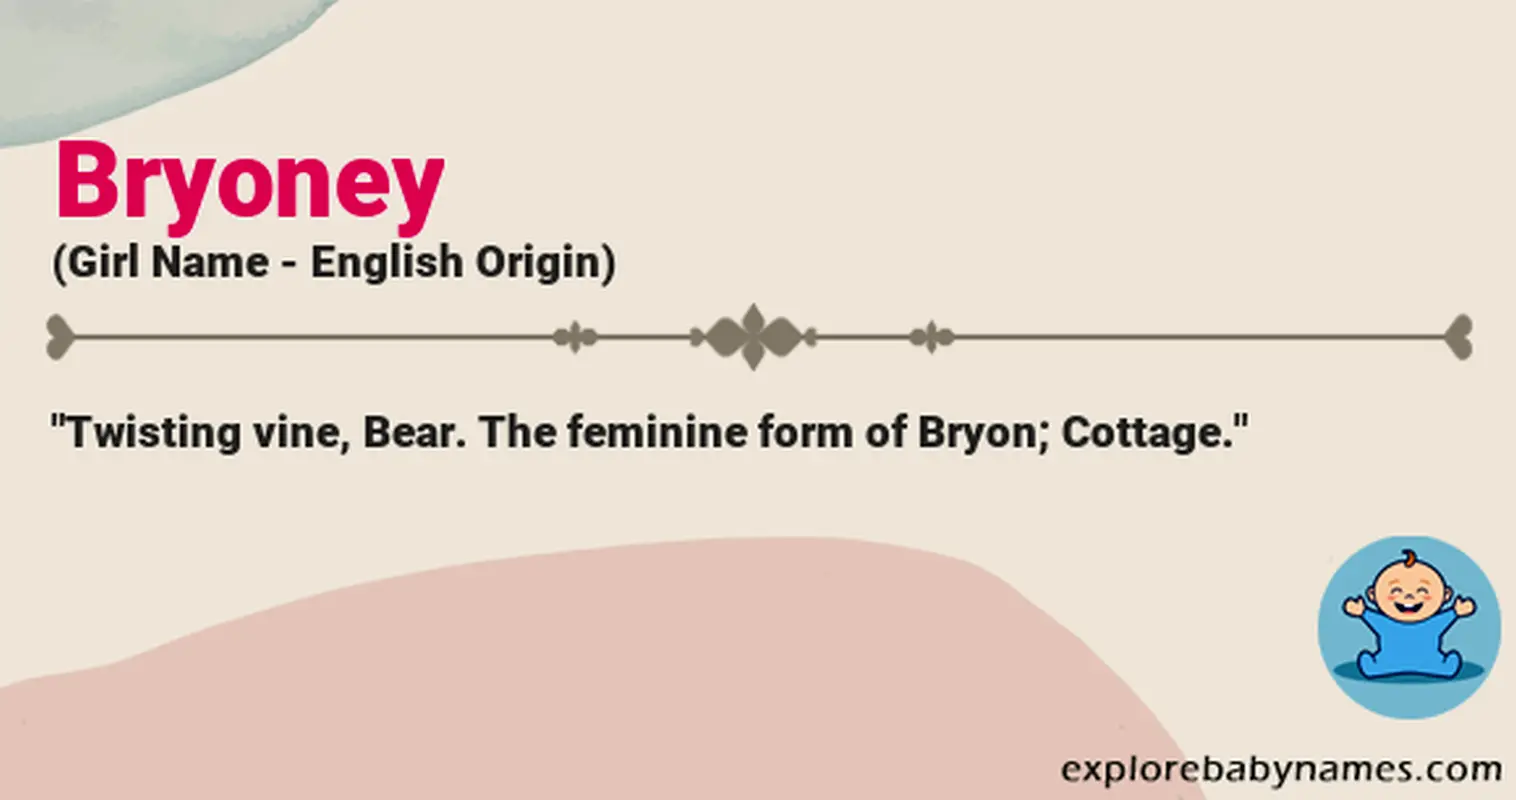 Meaning of Bryoney